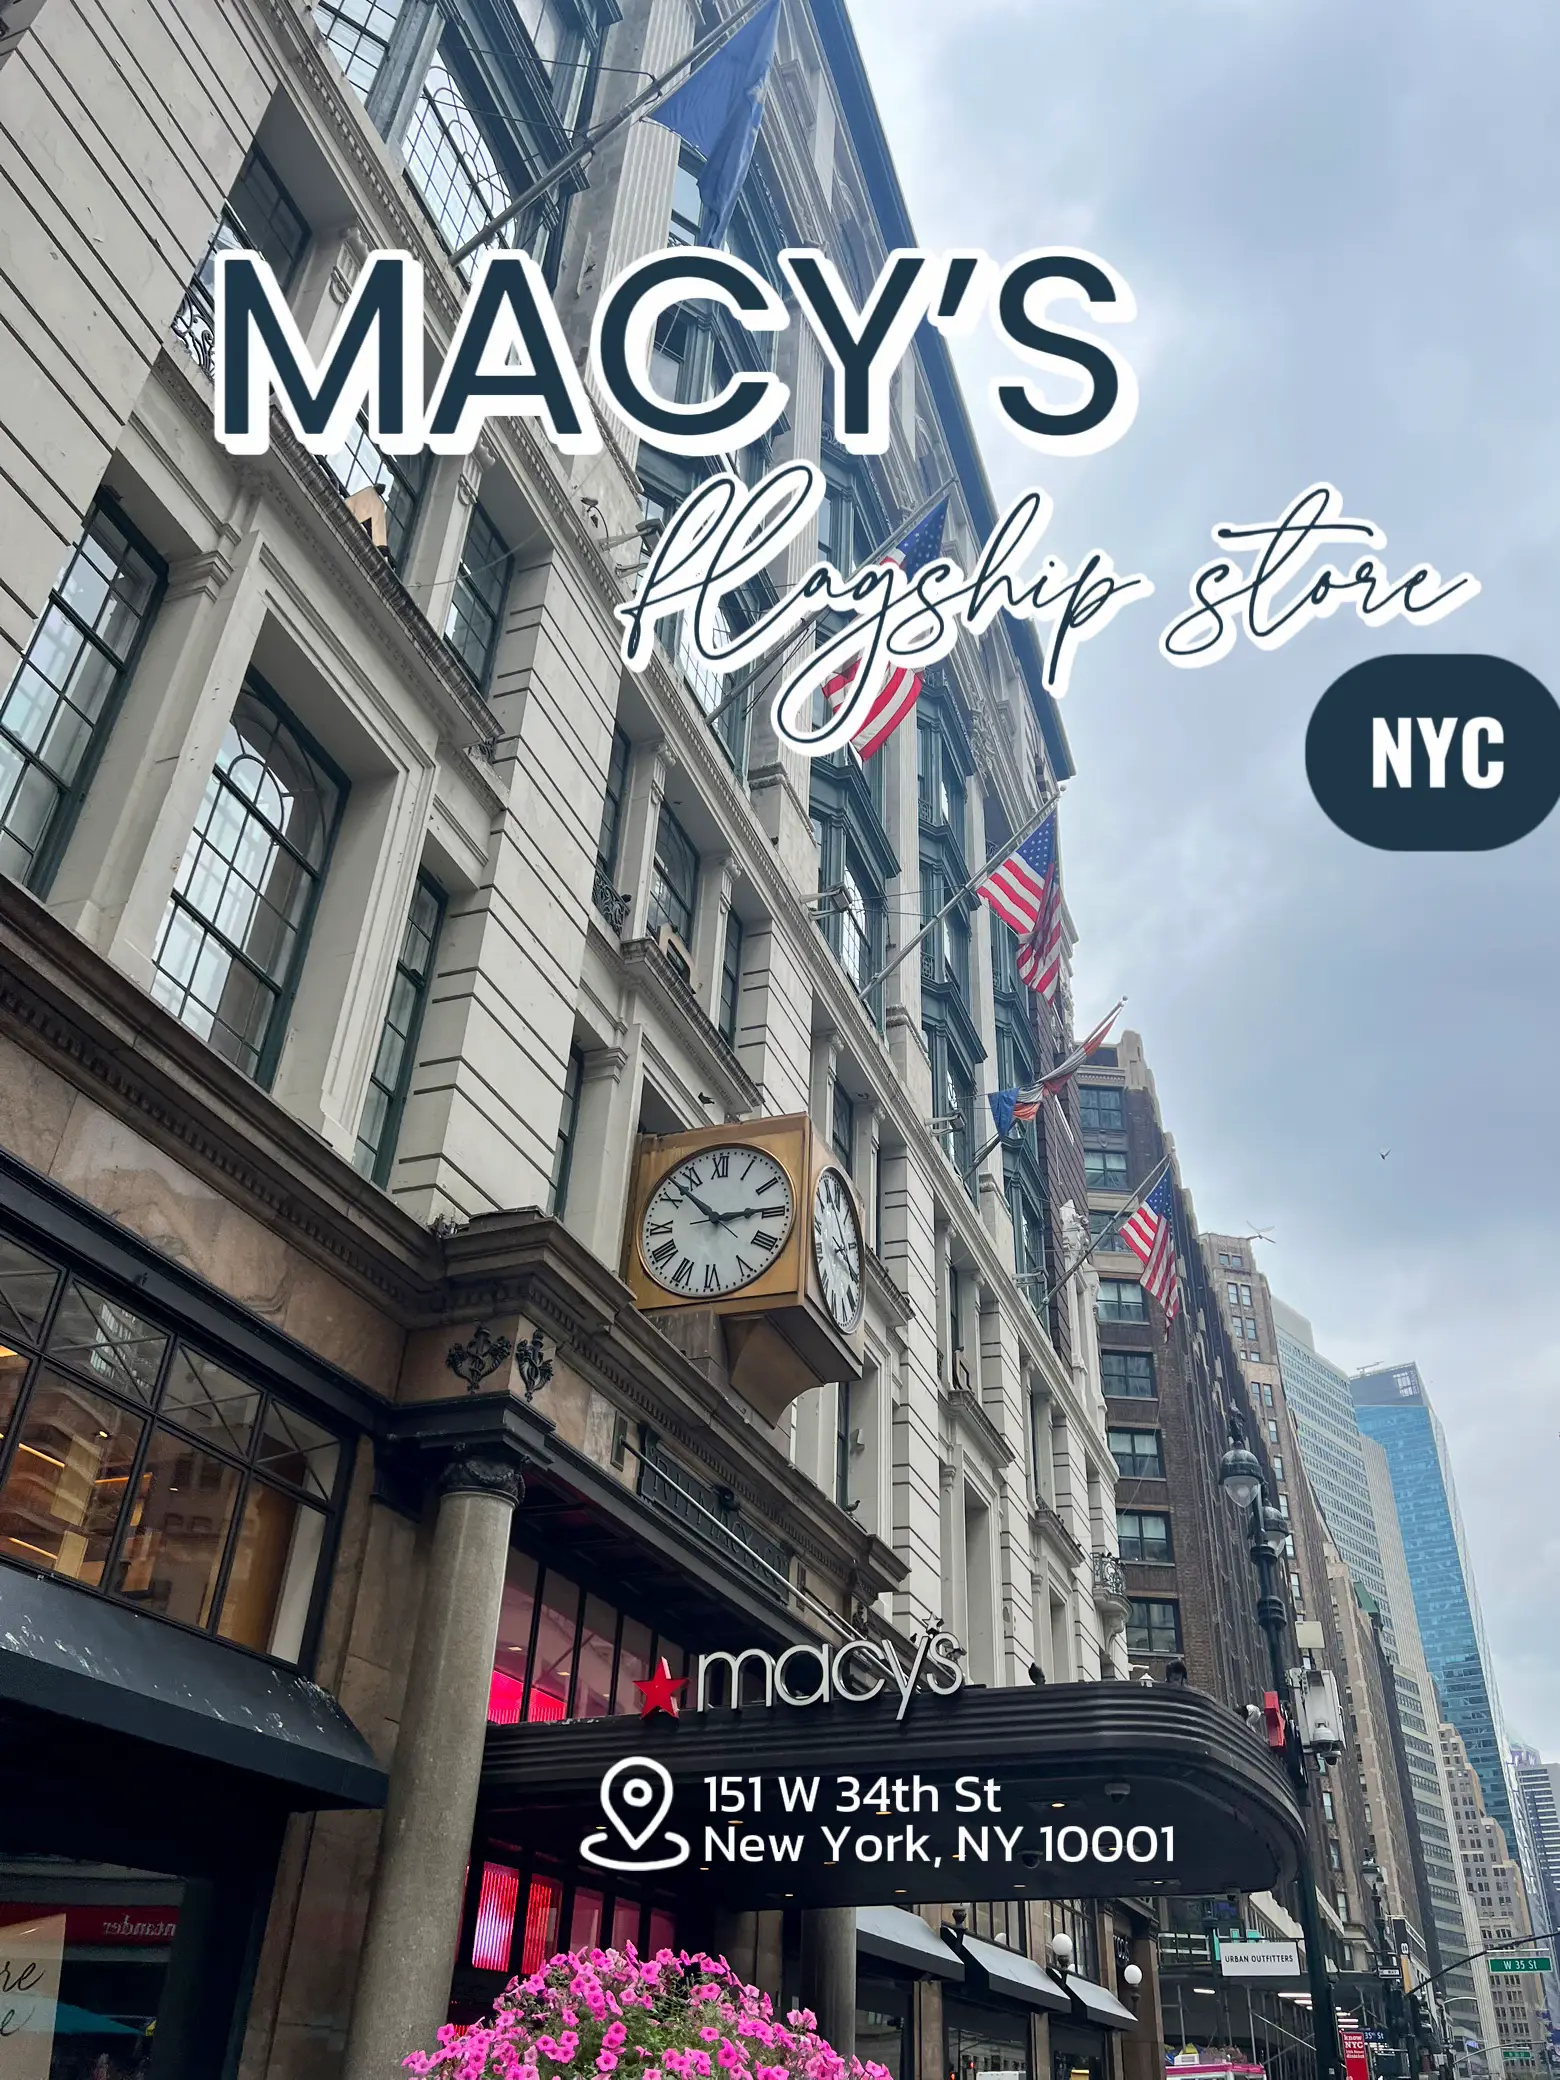 Macy's Herlad Sq NYC, Gallery posted by Alex Rossi